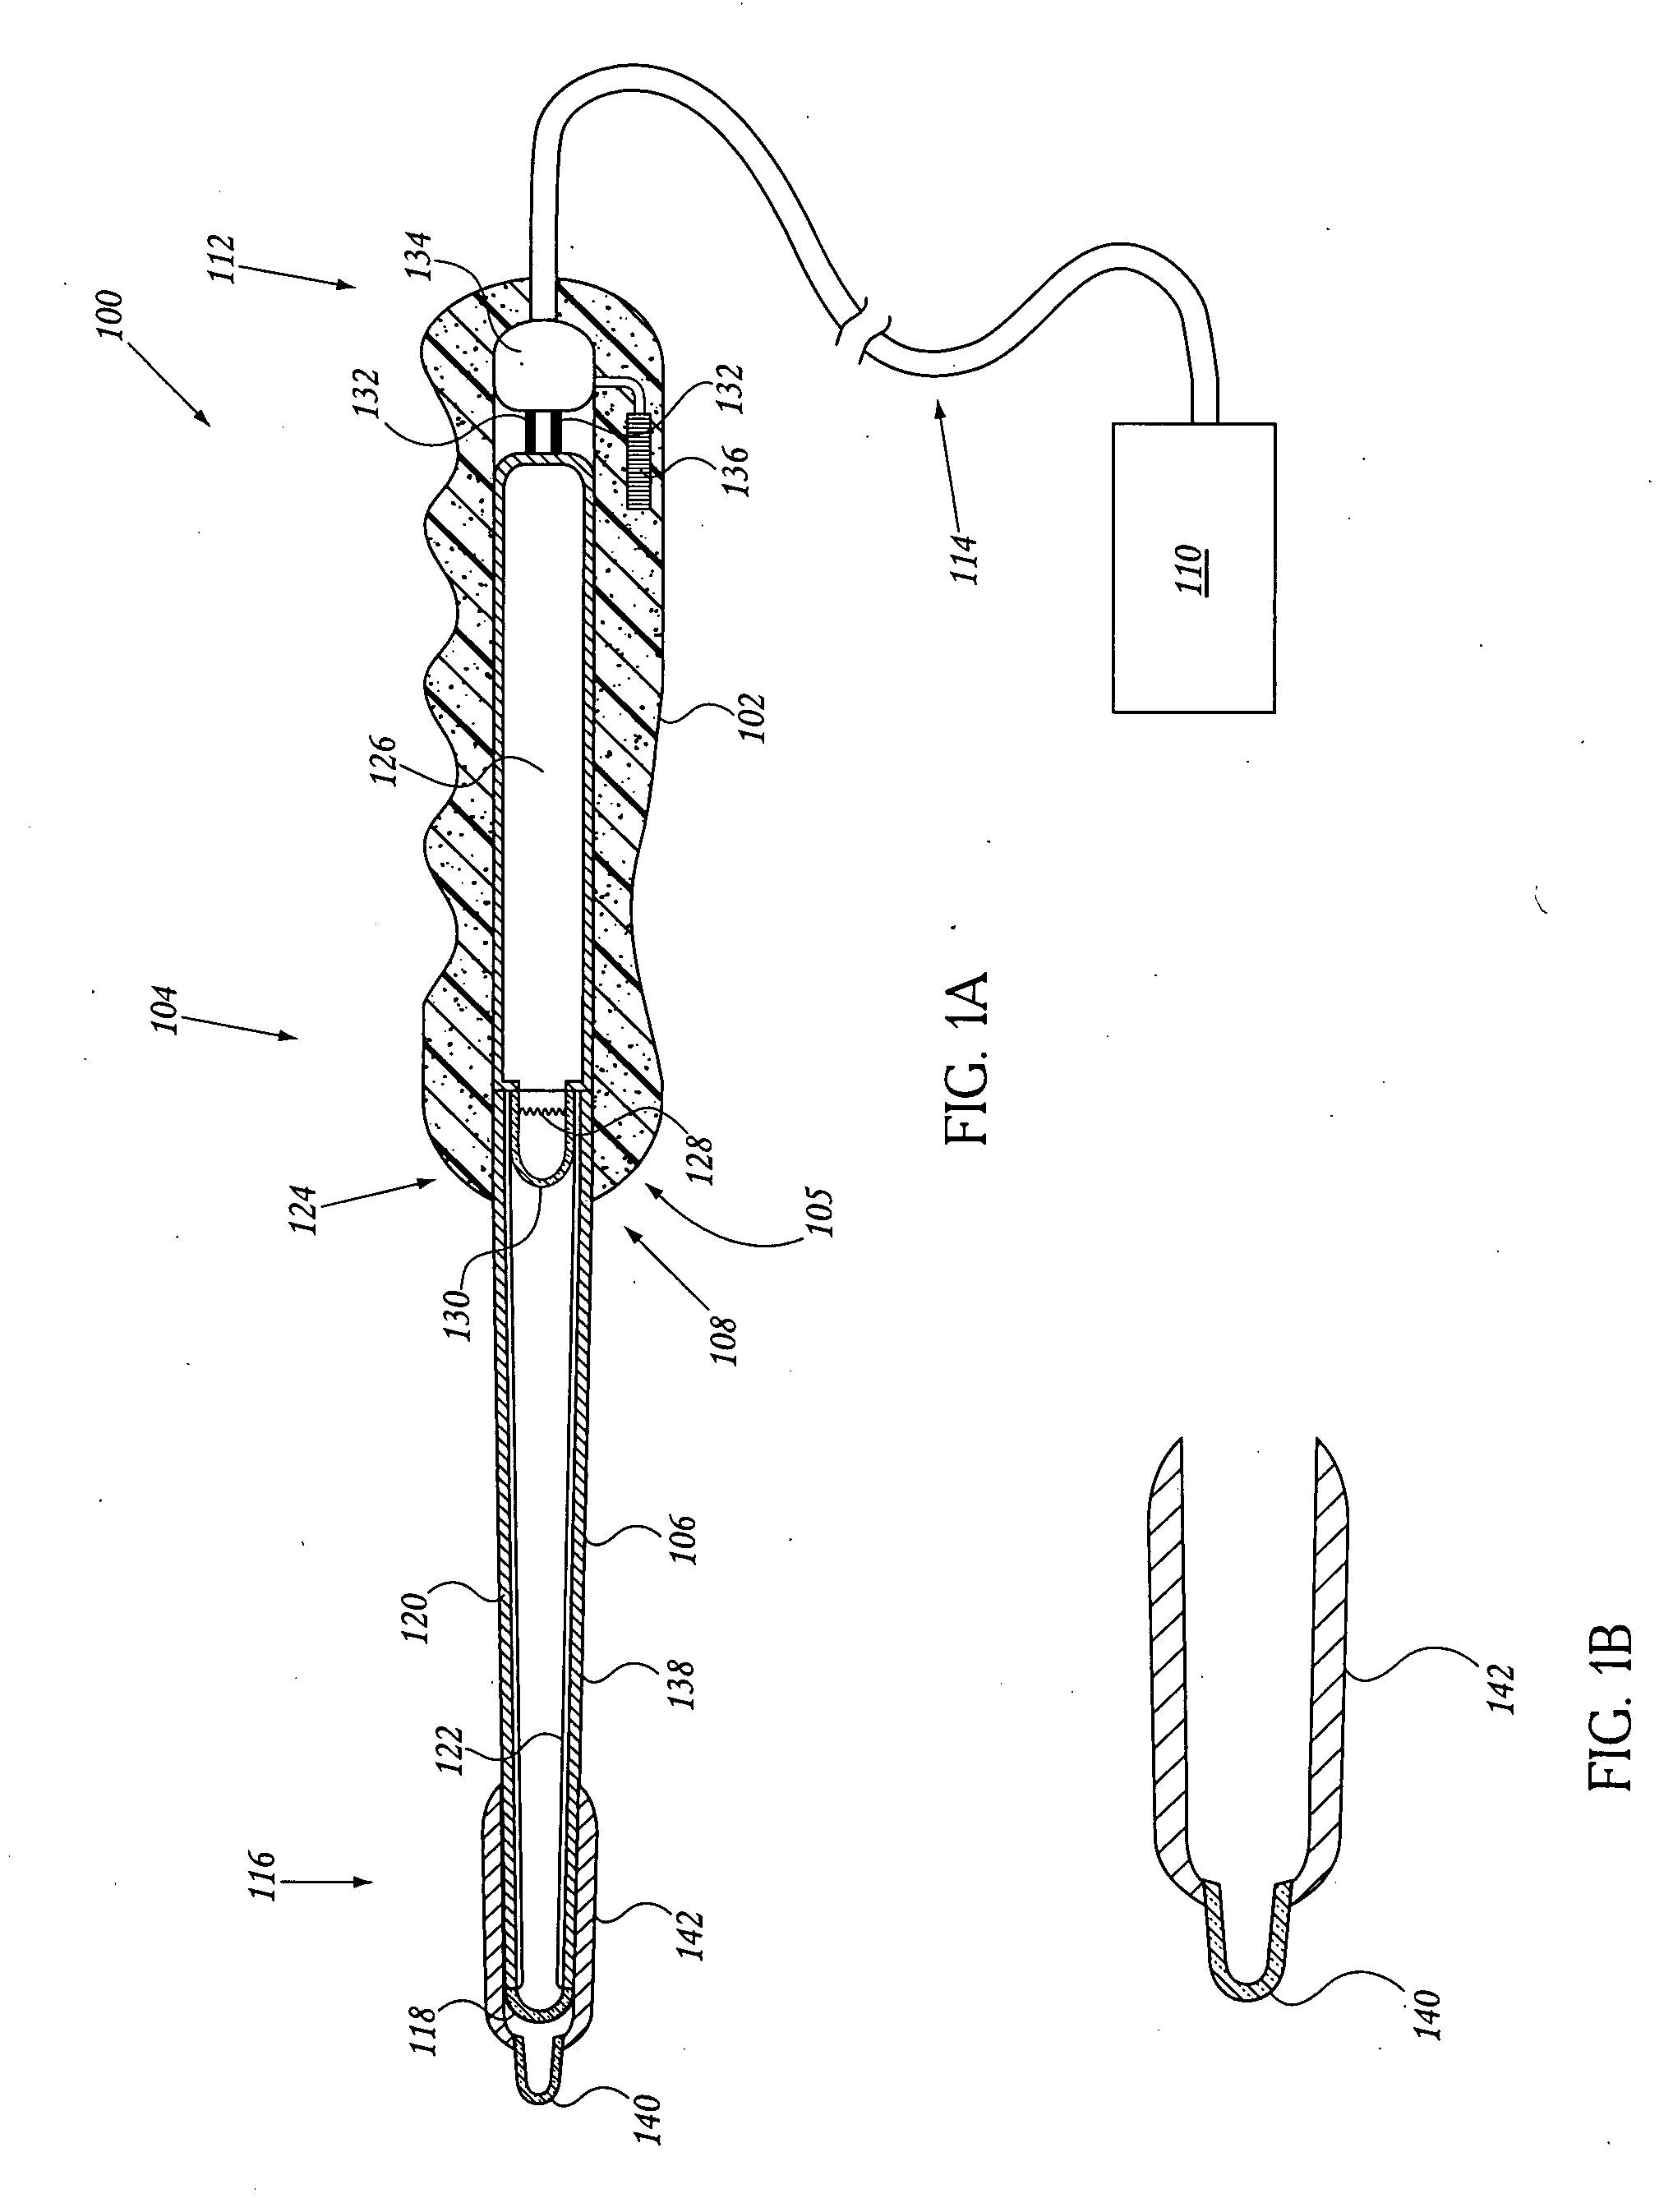 Optical therapy devices, systems, kits and methods for providing therapy to a body cavity